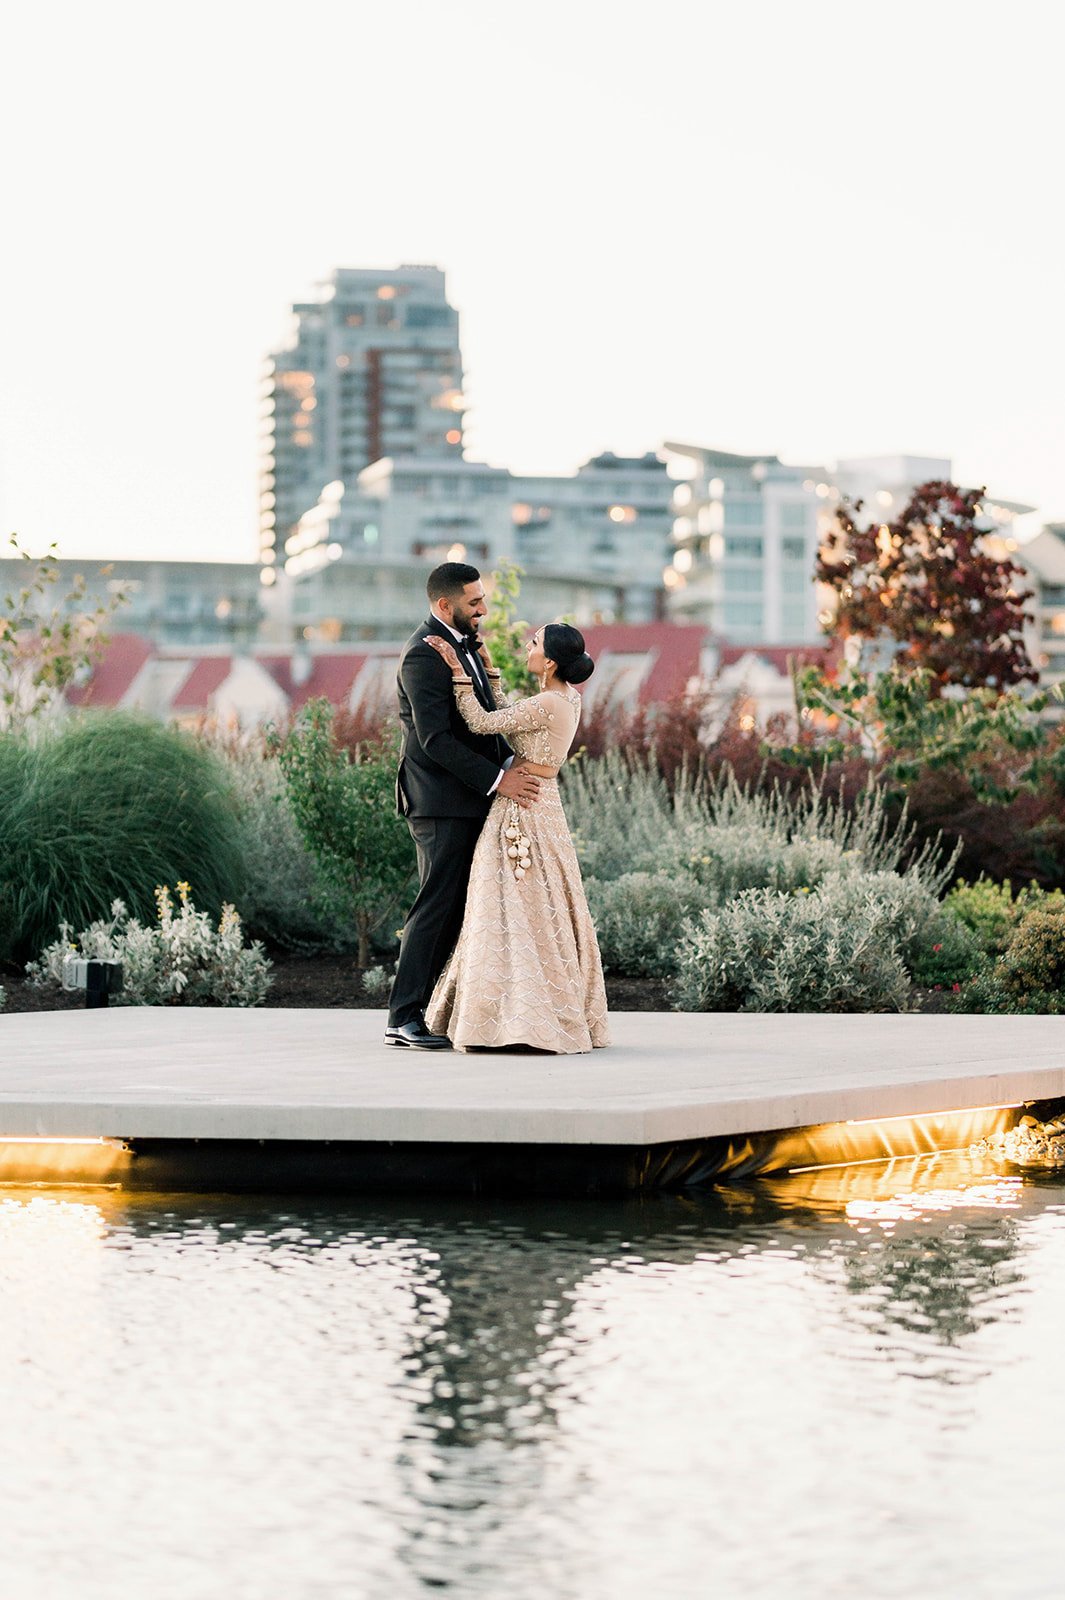 An Indian groom in a black suit and a bride in a gold lehenga dance on a boat dock in Victoria BC.